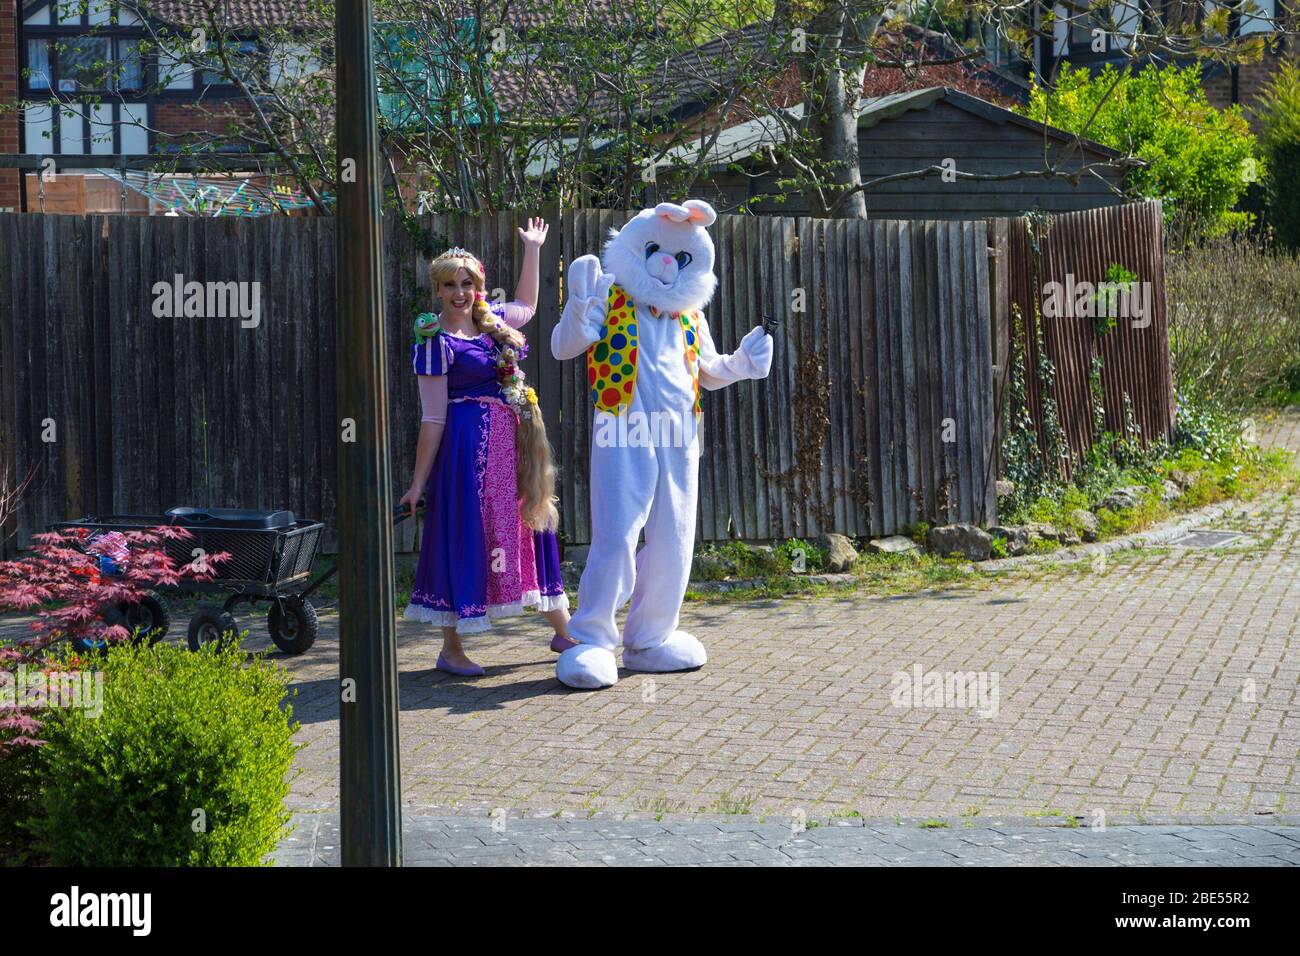 Ashford, Kent, UK. 12th Apr, 2020. Children all over the country will be missing out on an Easter egg hunt  this morning due to the coronavirus pandemic, so this couple from the village of Hamstreet near Ashford in Kent bring a bit of joy to the streets dressed as the Easter bunny and Rapunzel. ©Paul Lawrenson 2020, Photo Credit: Paul Lawrenson/Alamy Live News Stock Photo